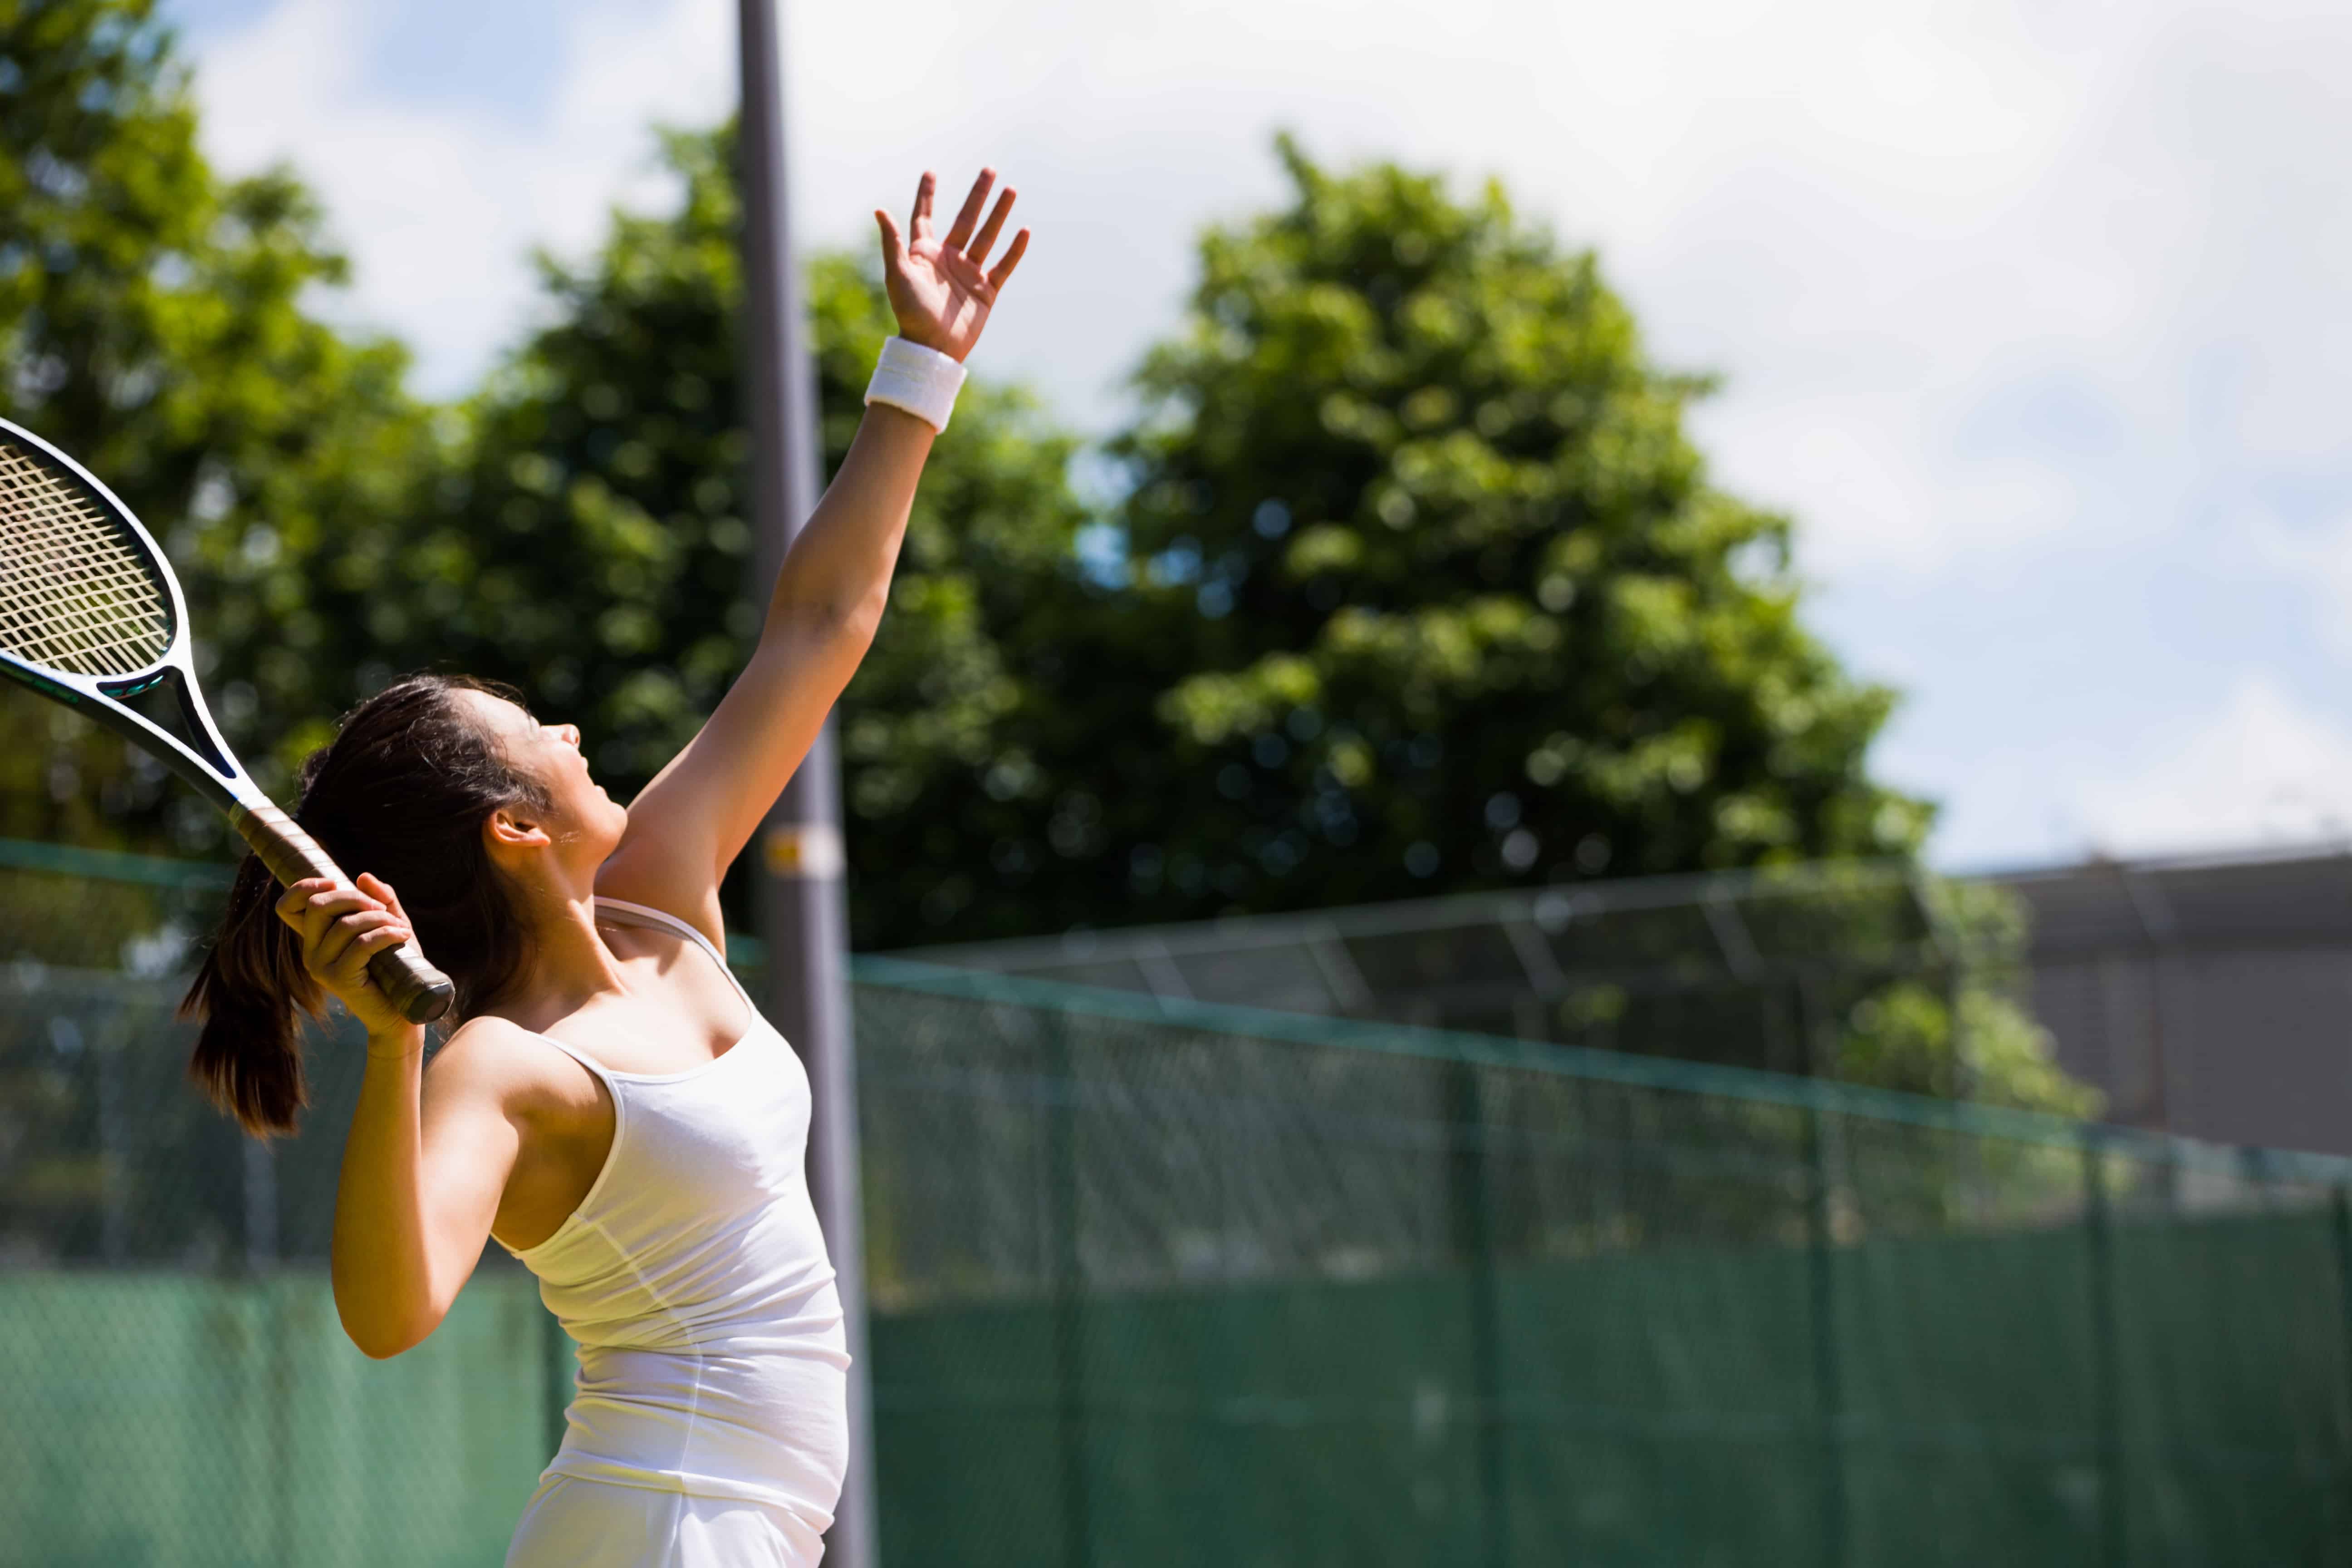 The Basic Rules of Tennis